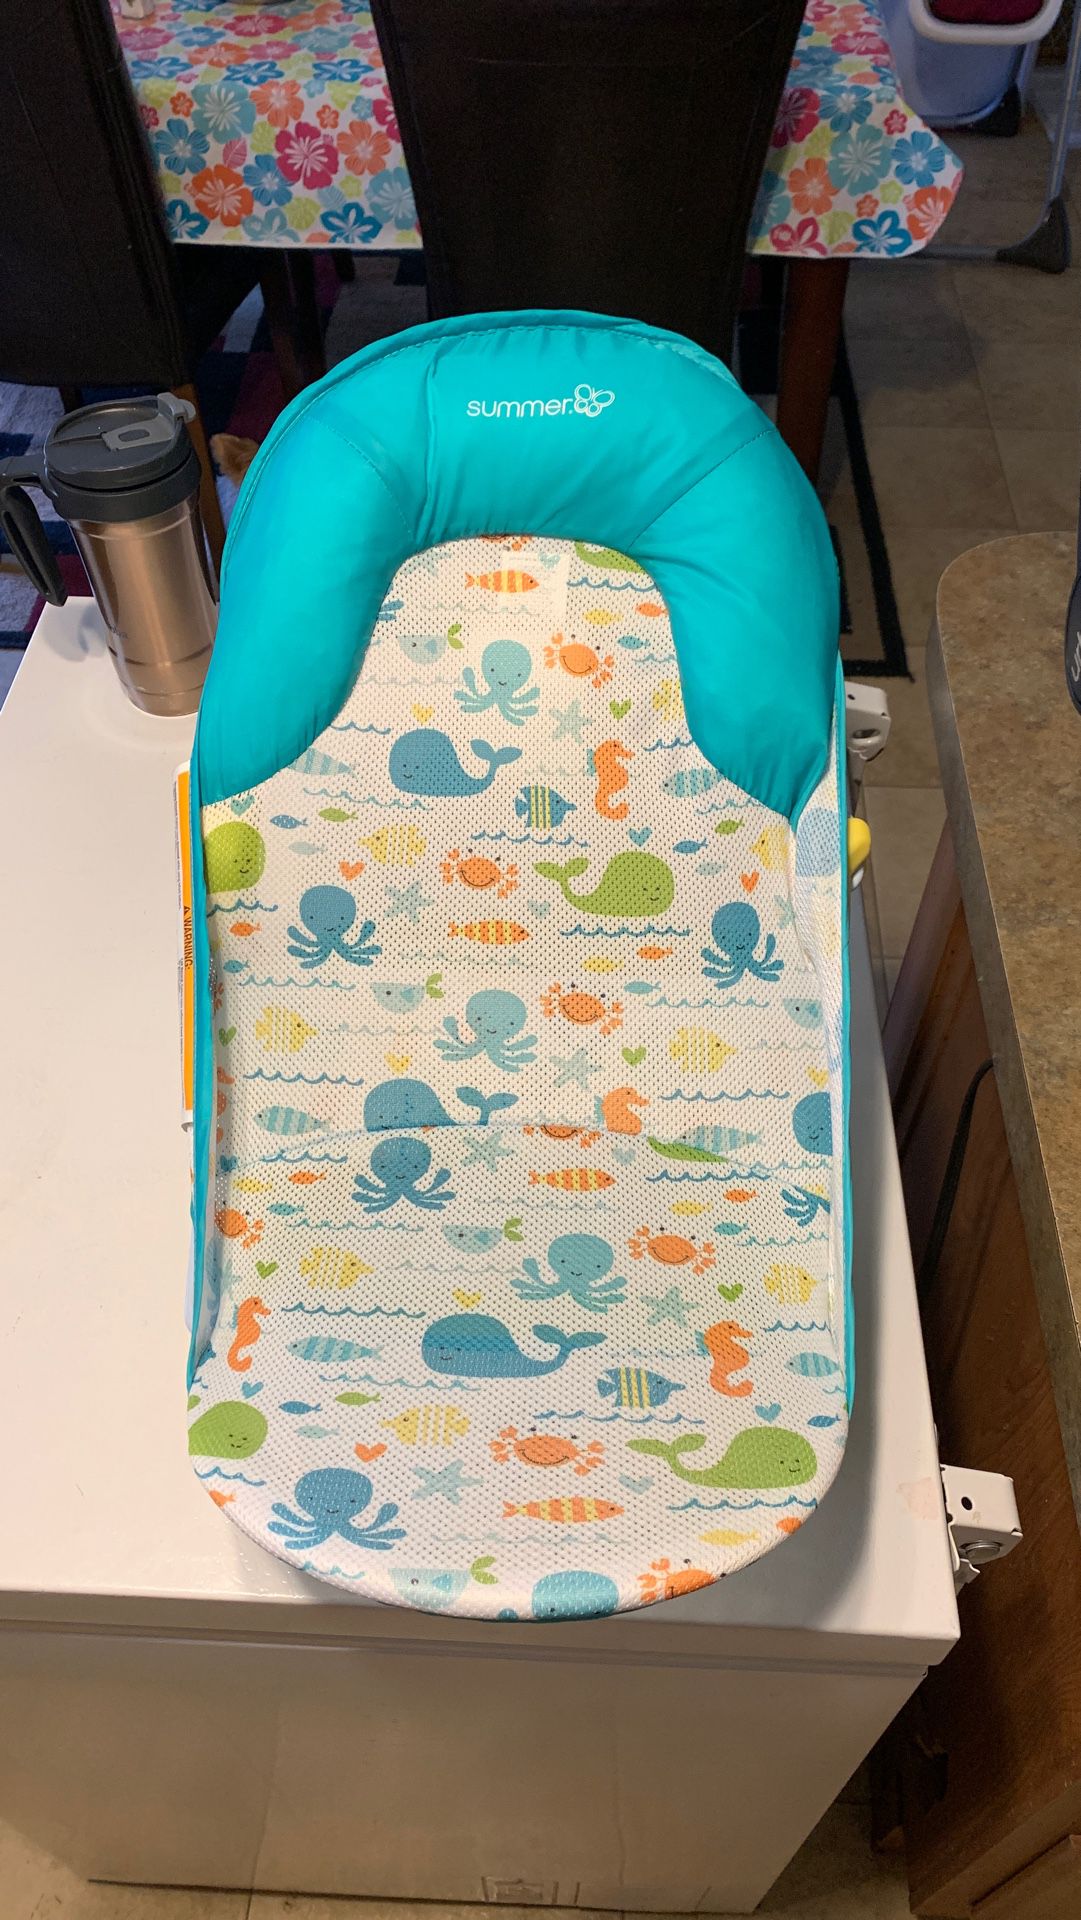 Baby Items (Baby bath, Urbini baby carrier, Evenflo baby carrier, Ingenuity baby swing)